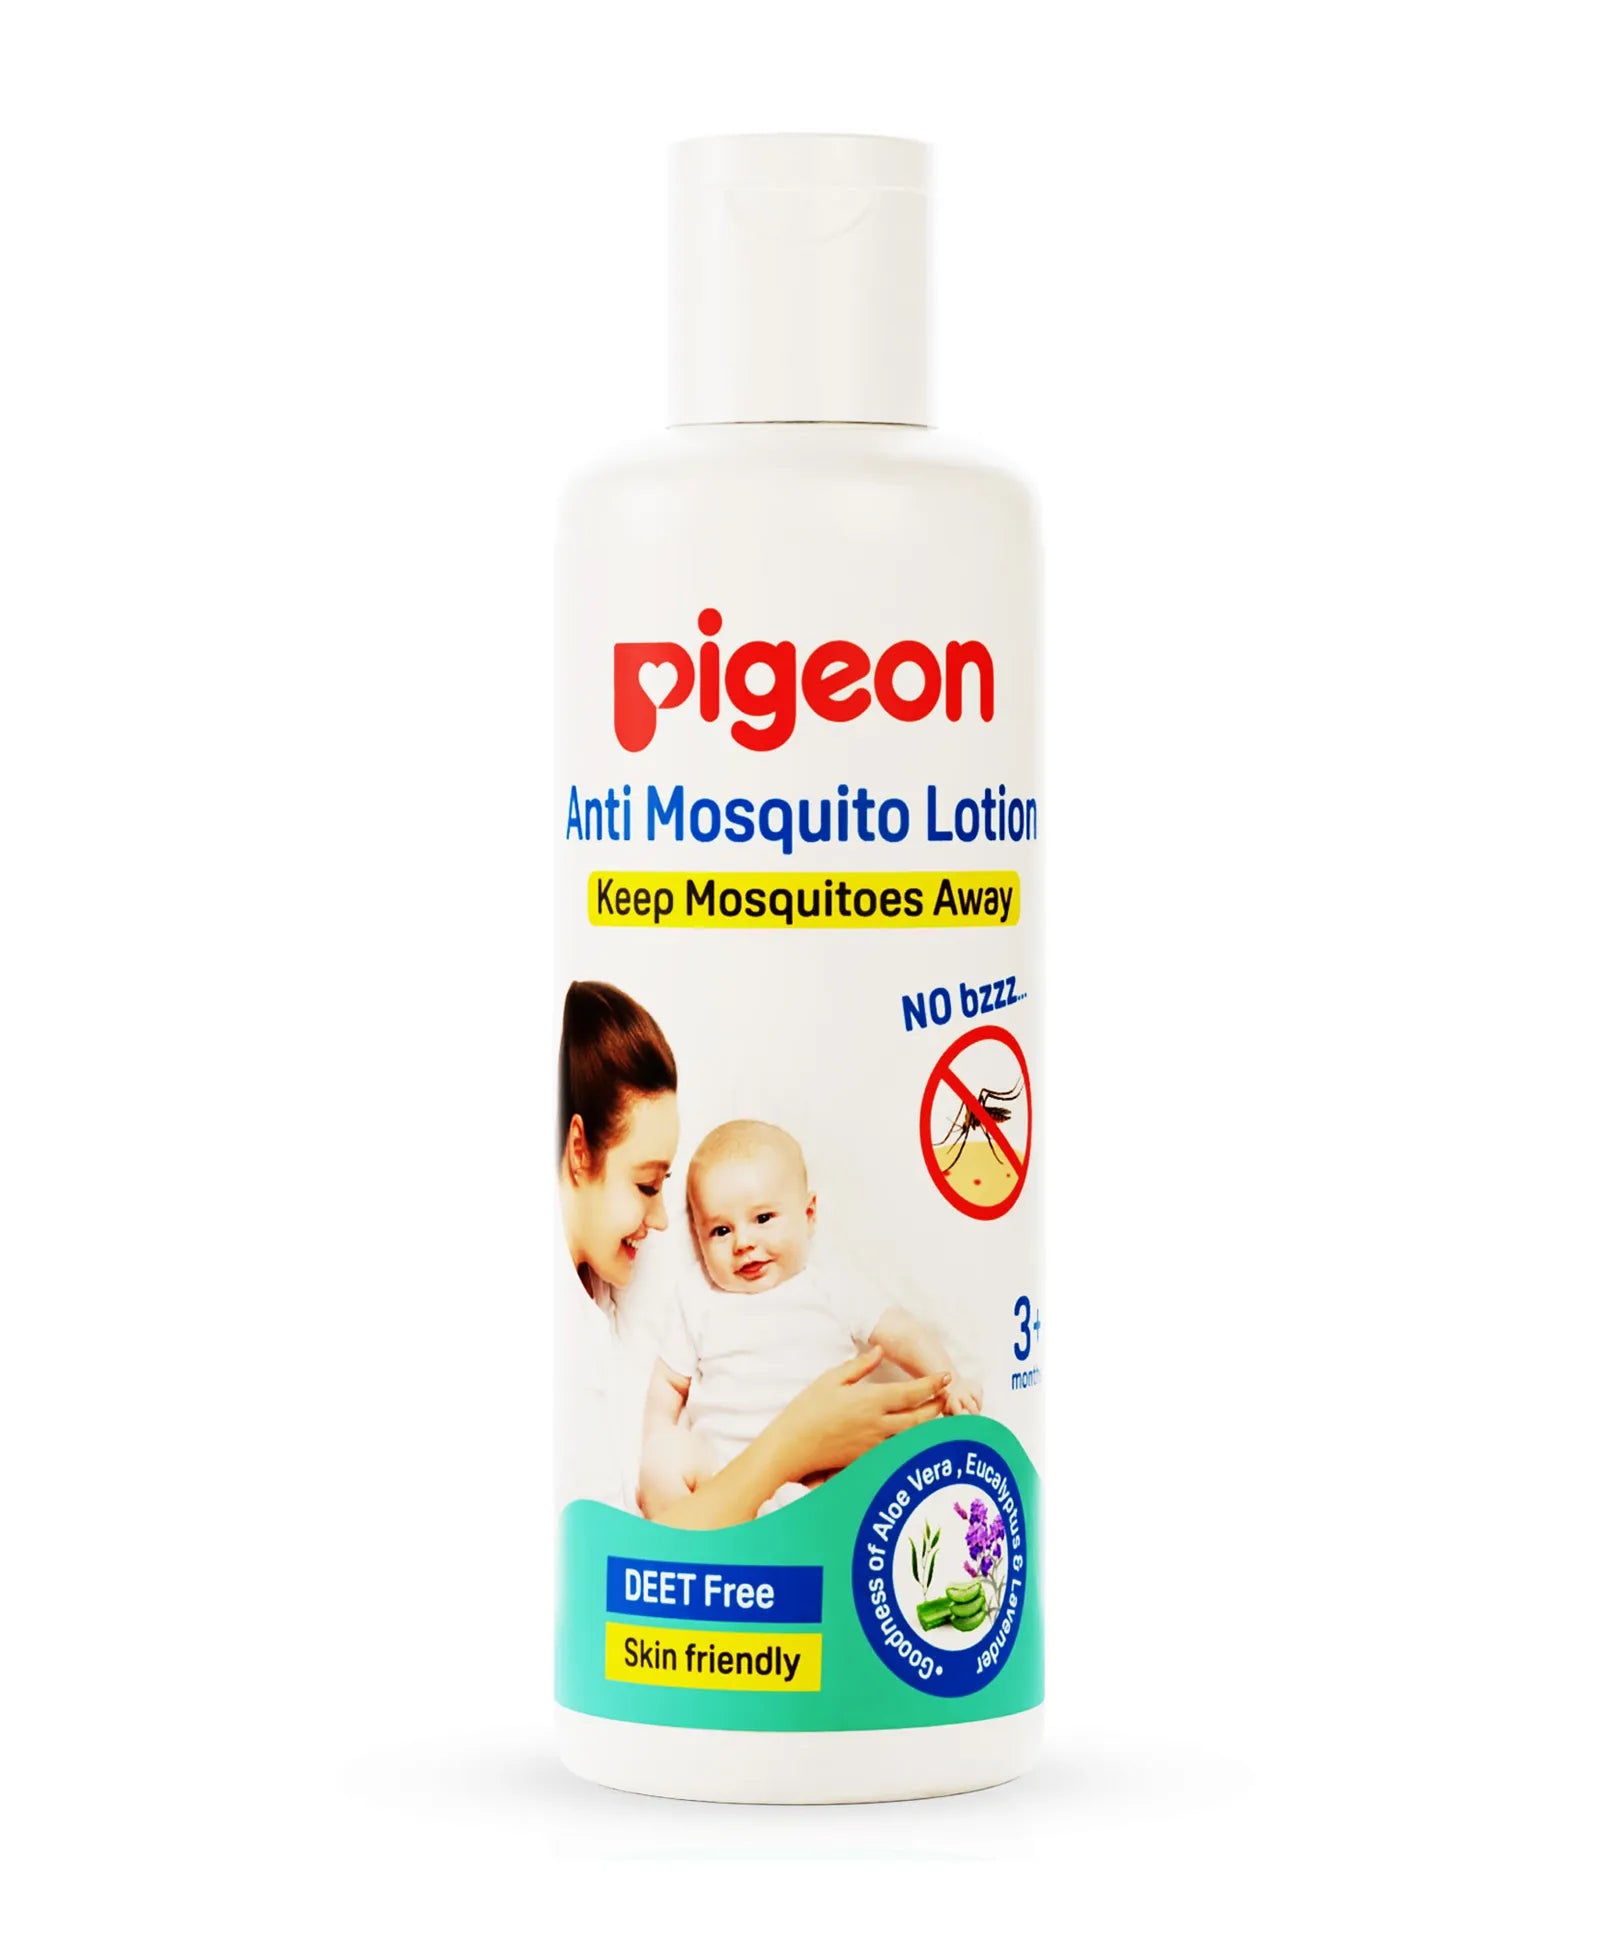 Buy Pigeon Anti Mosquito Lotion for Small Children - 100ml Online in India at uyyaala.com